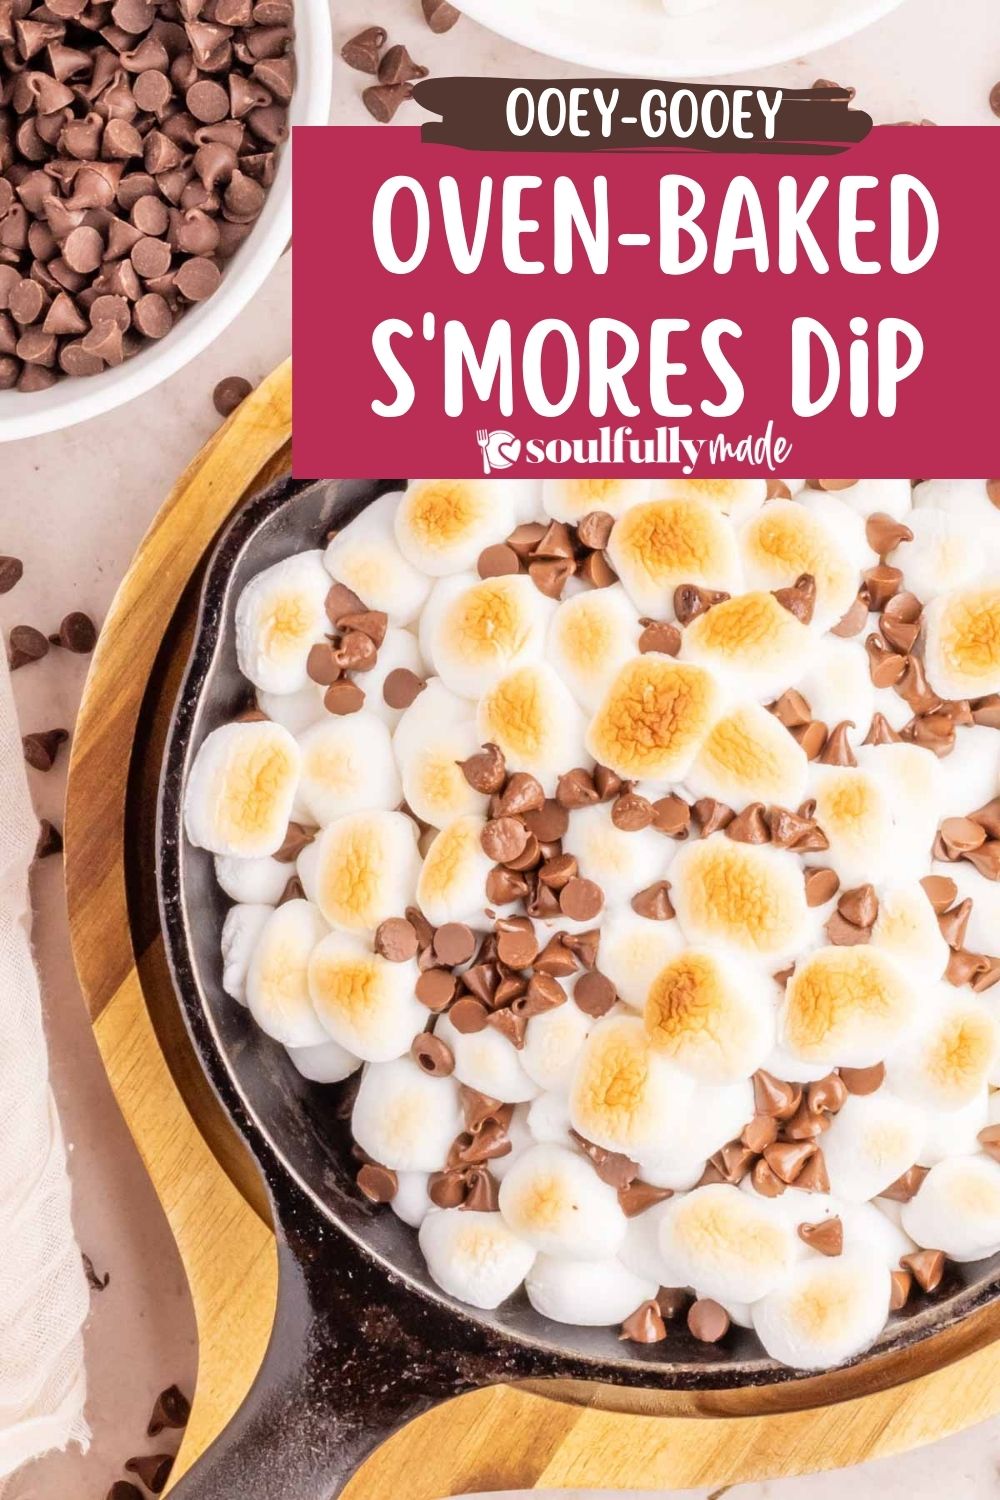 Oven-baked S'mores Dip cooked in a cast itron skillet and topped with chocolate chips.